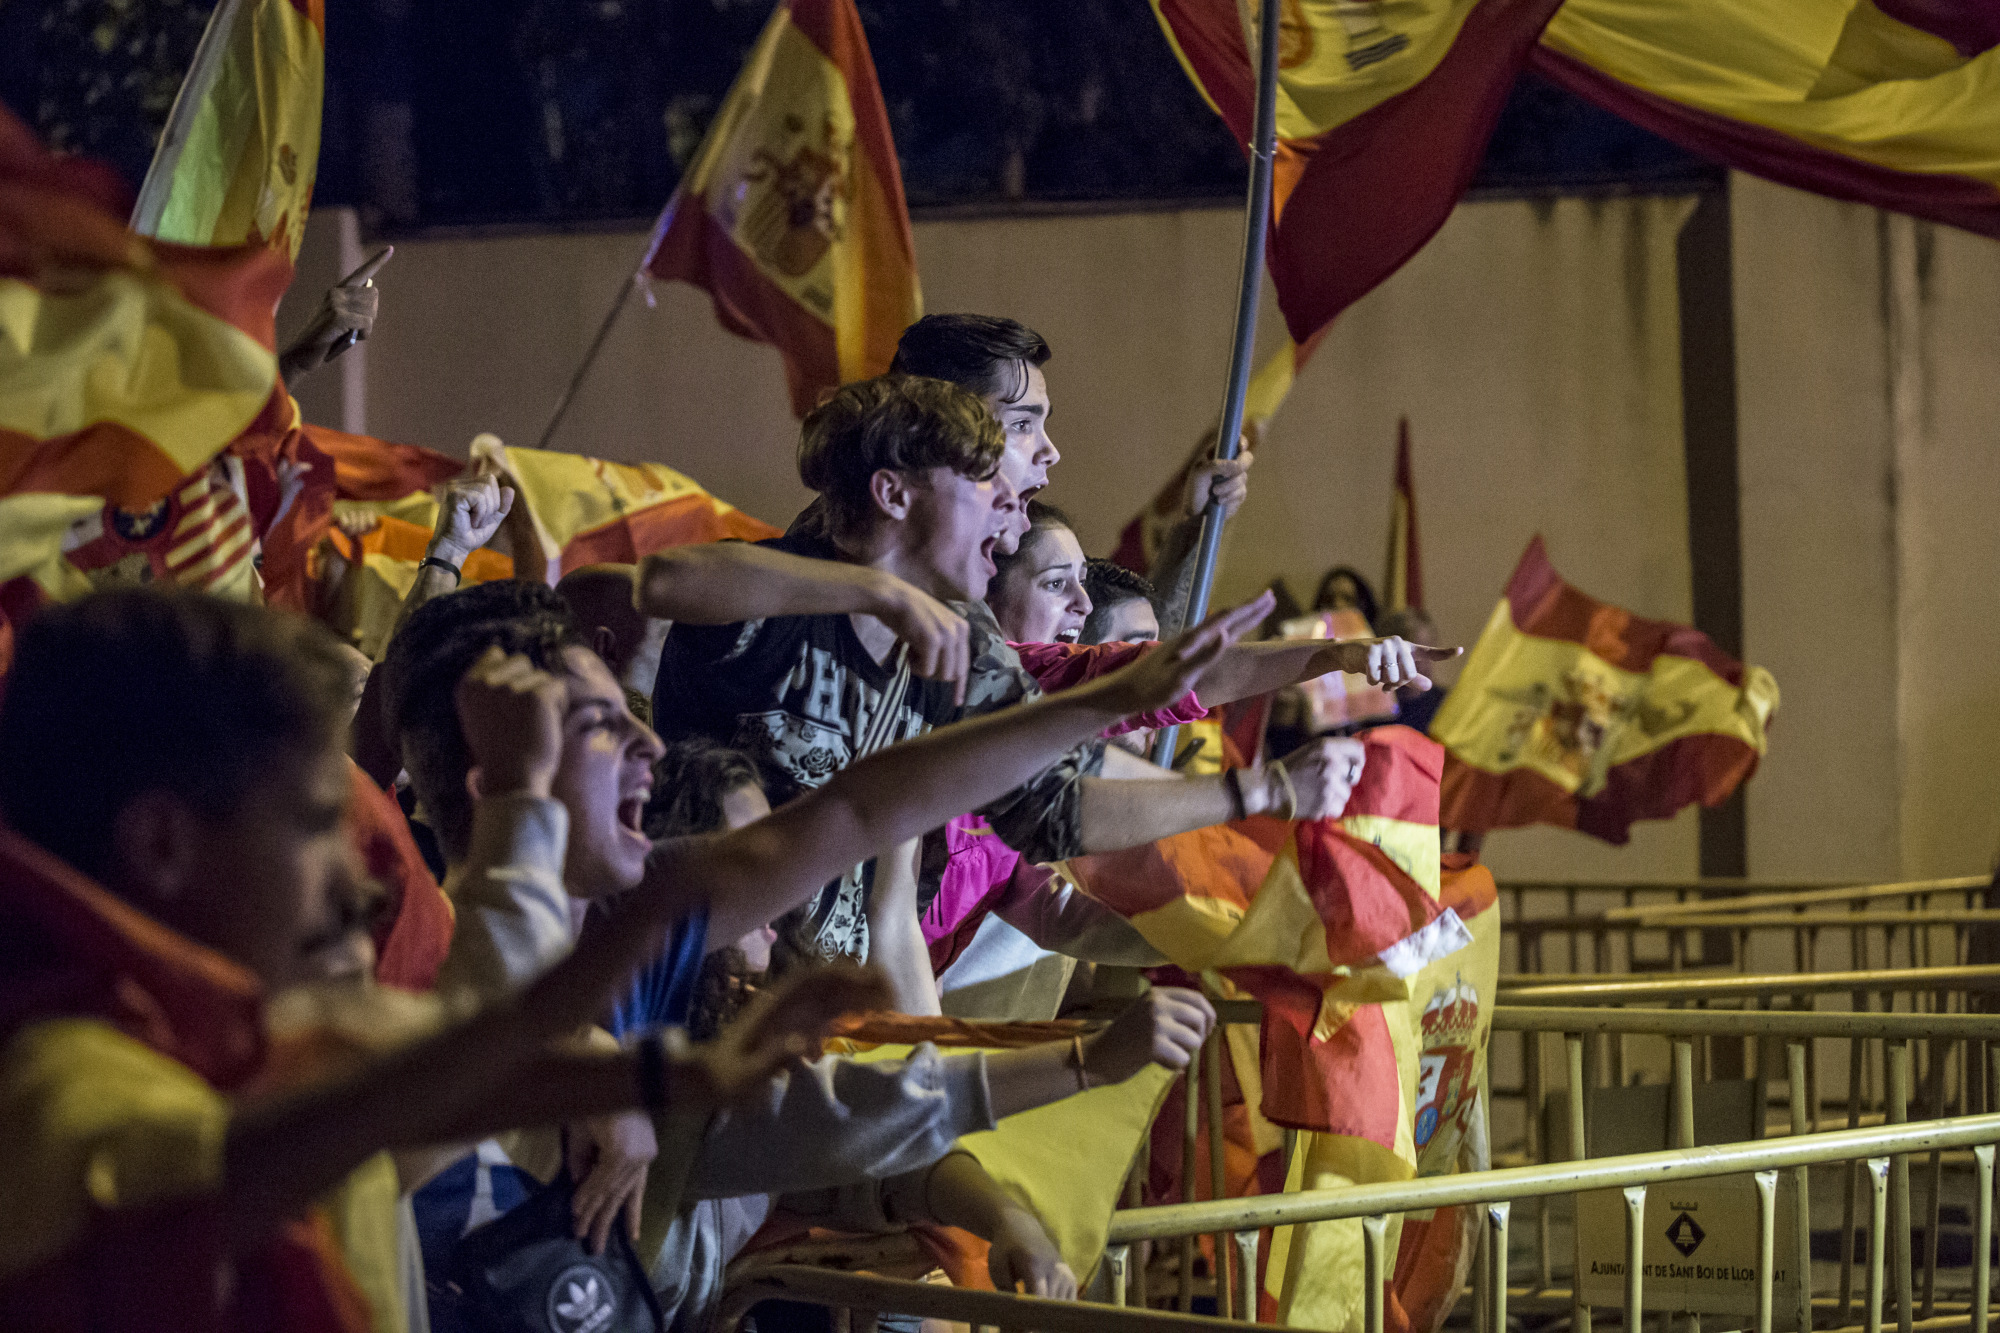 Anti-separatist demonstrators in support of the Spanish National Police and Civil Guard wave Spanish national flags on Oct. 5, 2017.